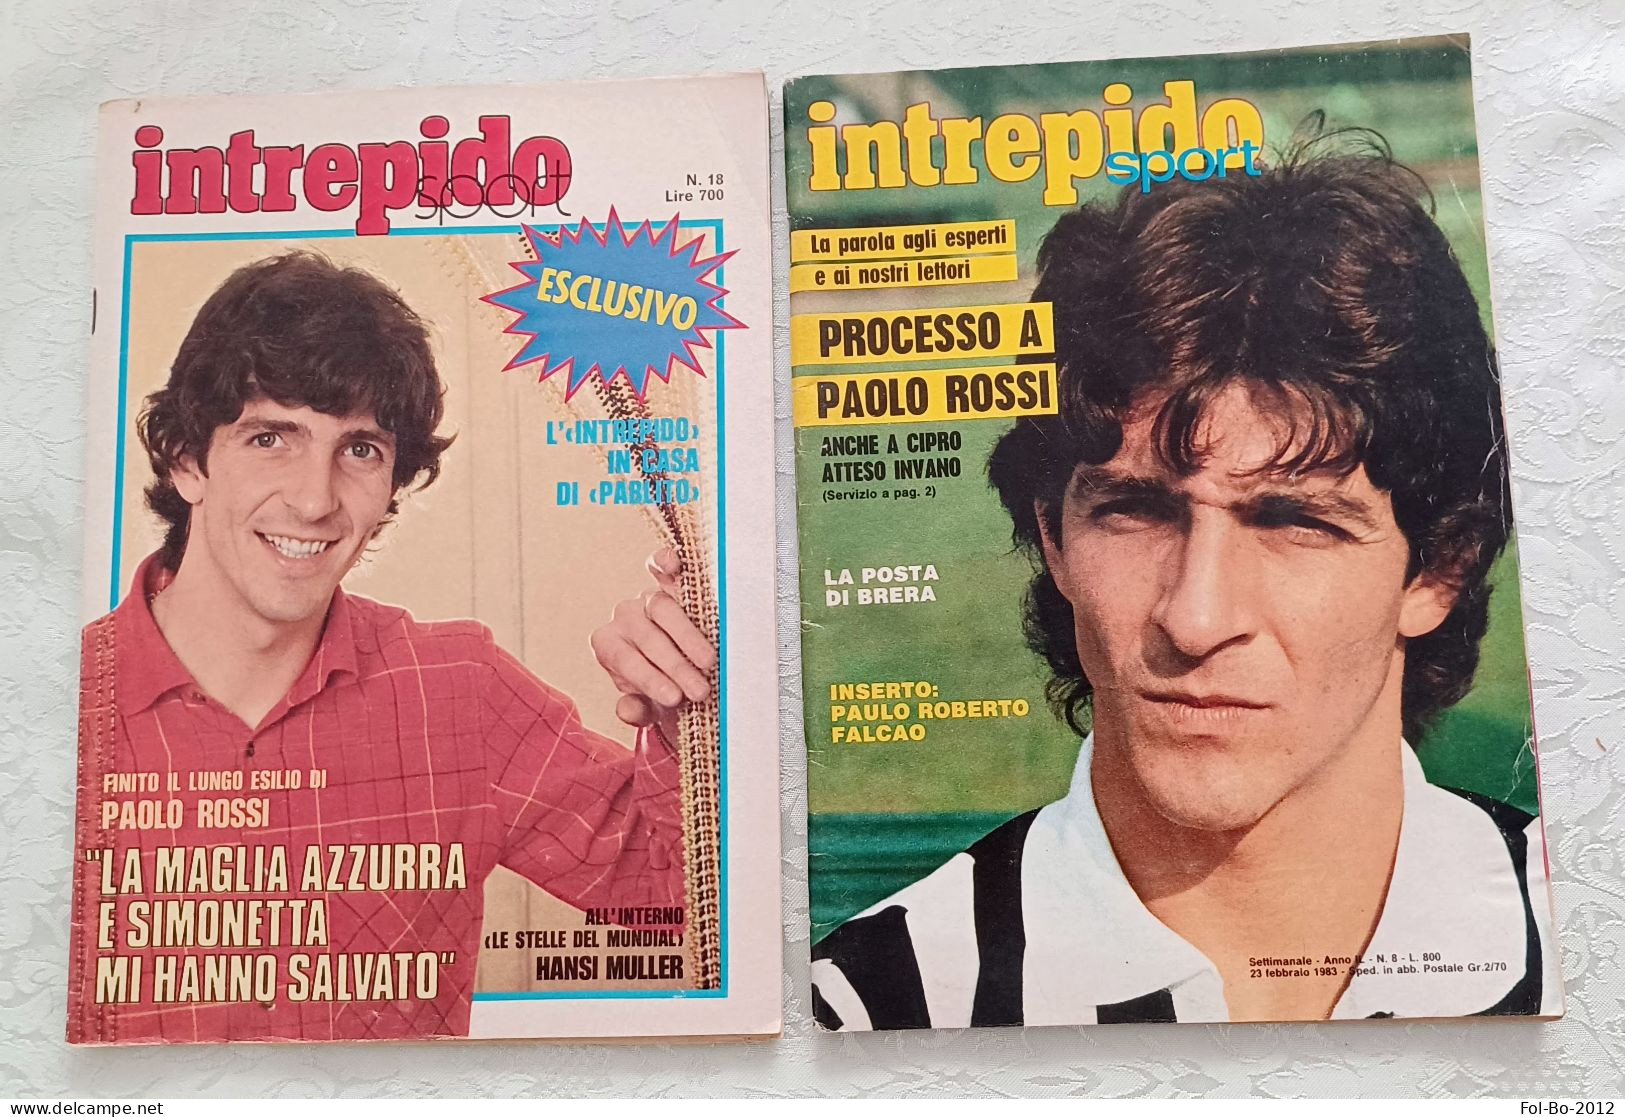 Paolo Rossi.intrepido N 18 1982 N 8.1983 - Premières éditions